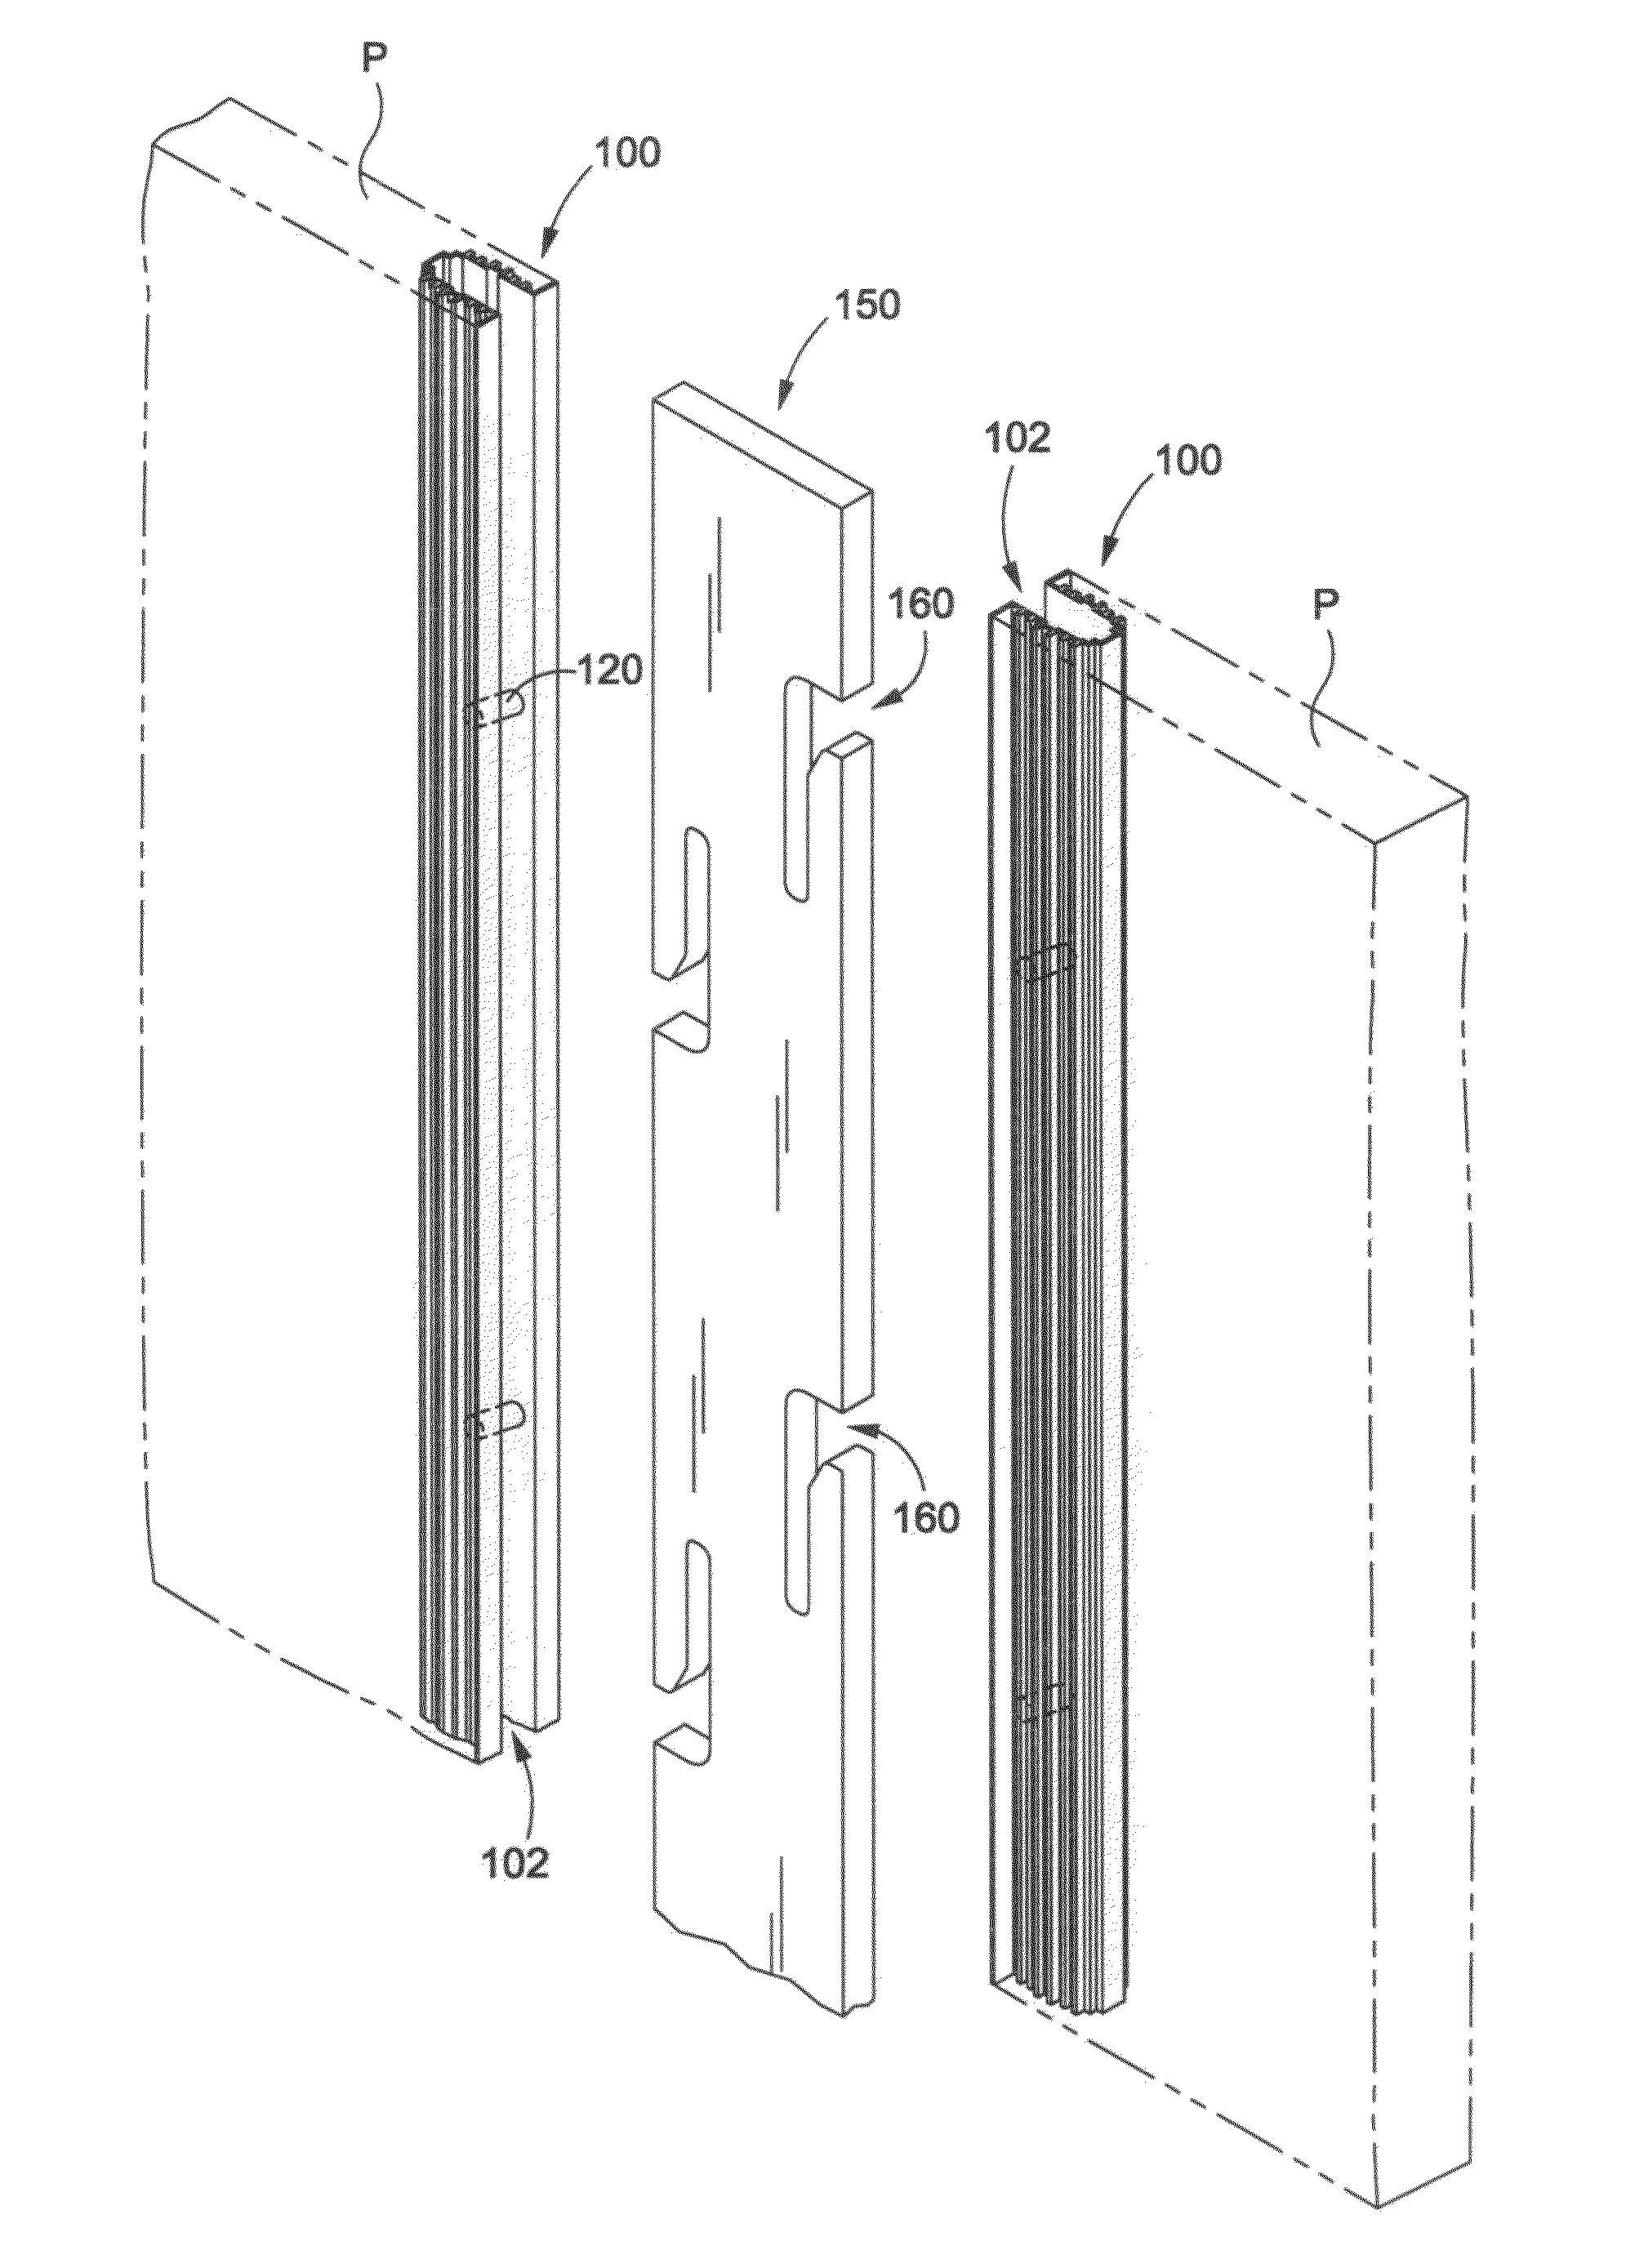 Method and system for interconnecting structural panels